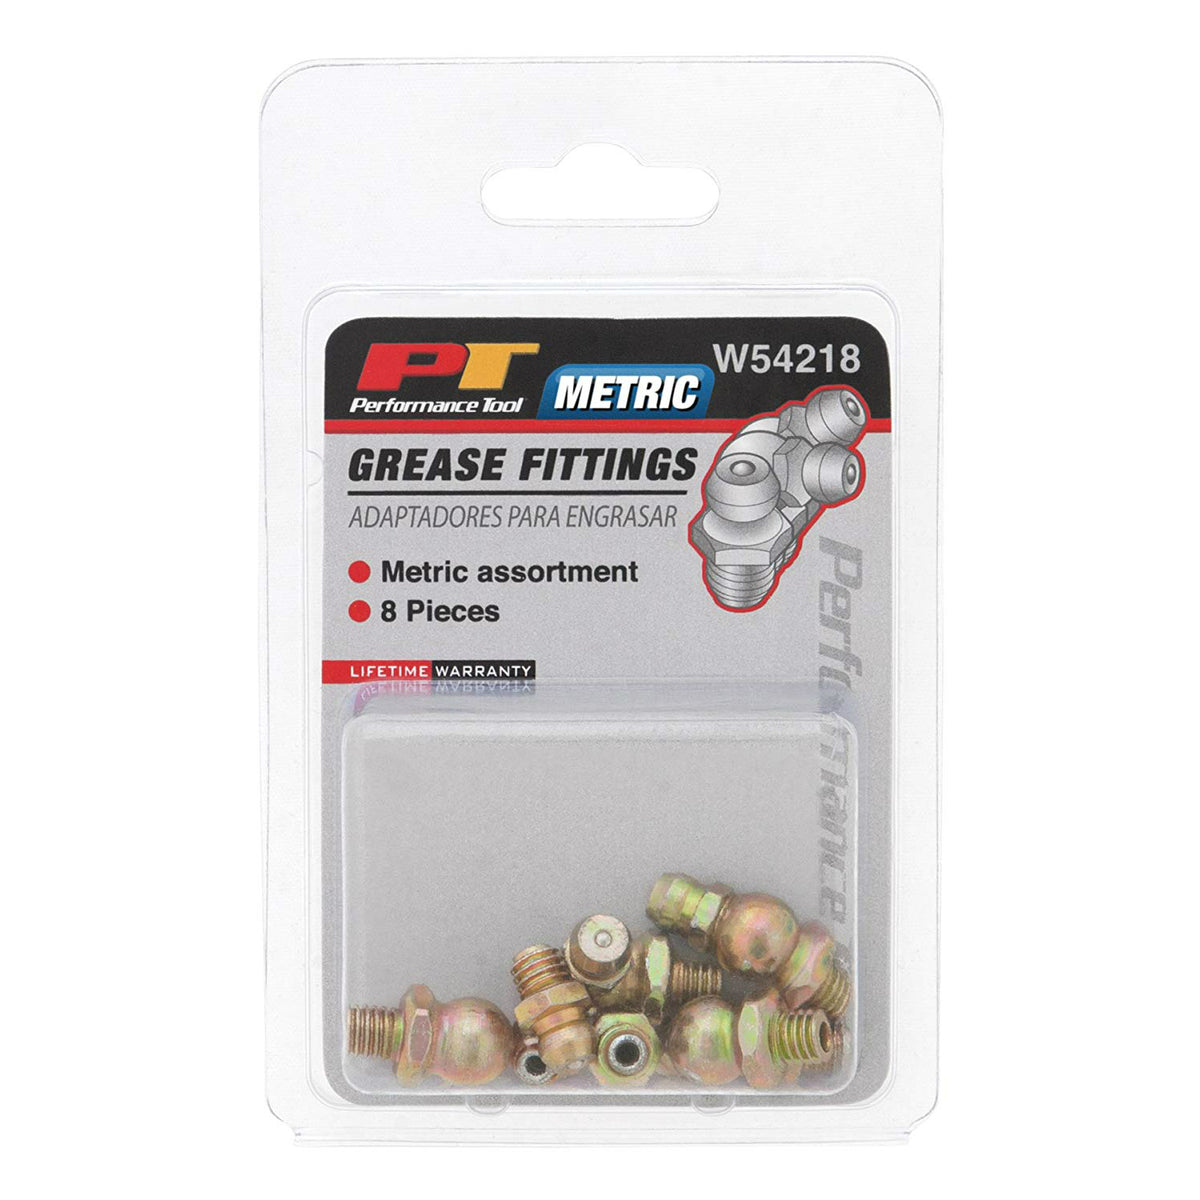 Performance Tool W54218 Metric Grease Fitting Set, 6 mm x 1 Thread, 8 Piece